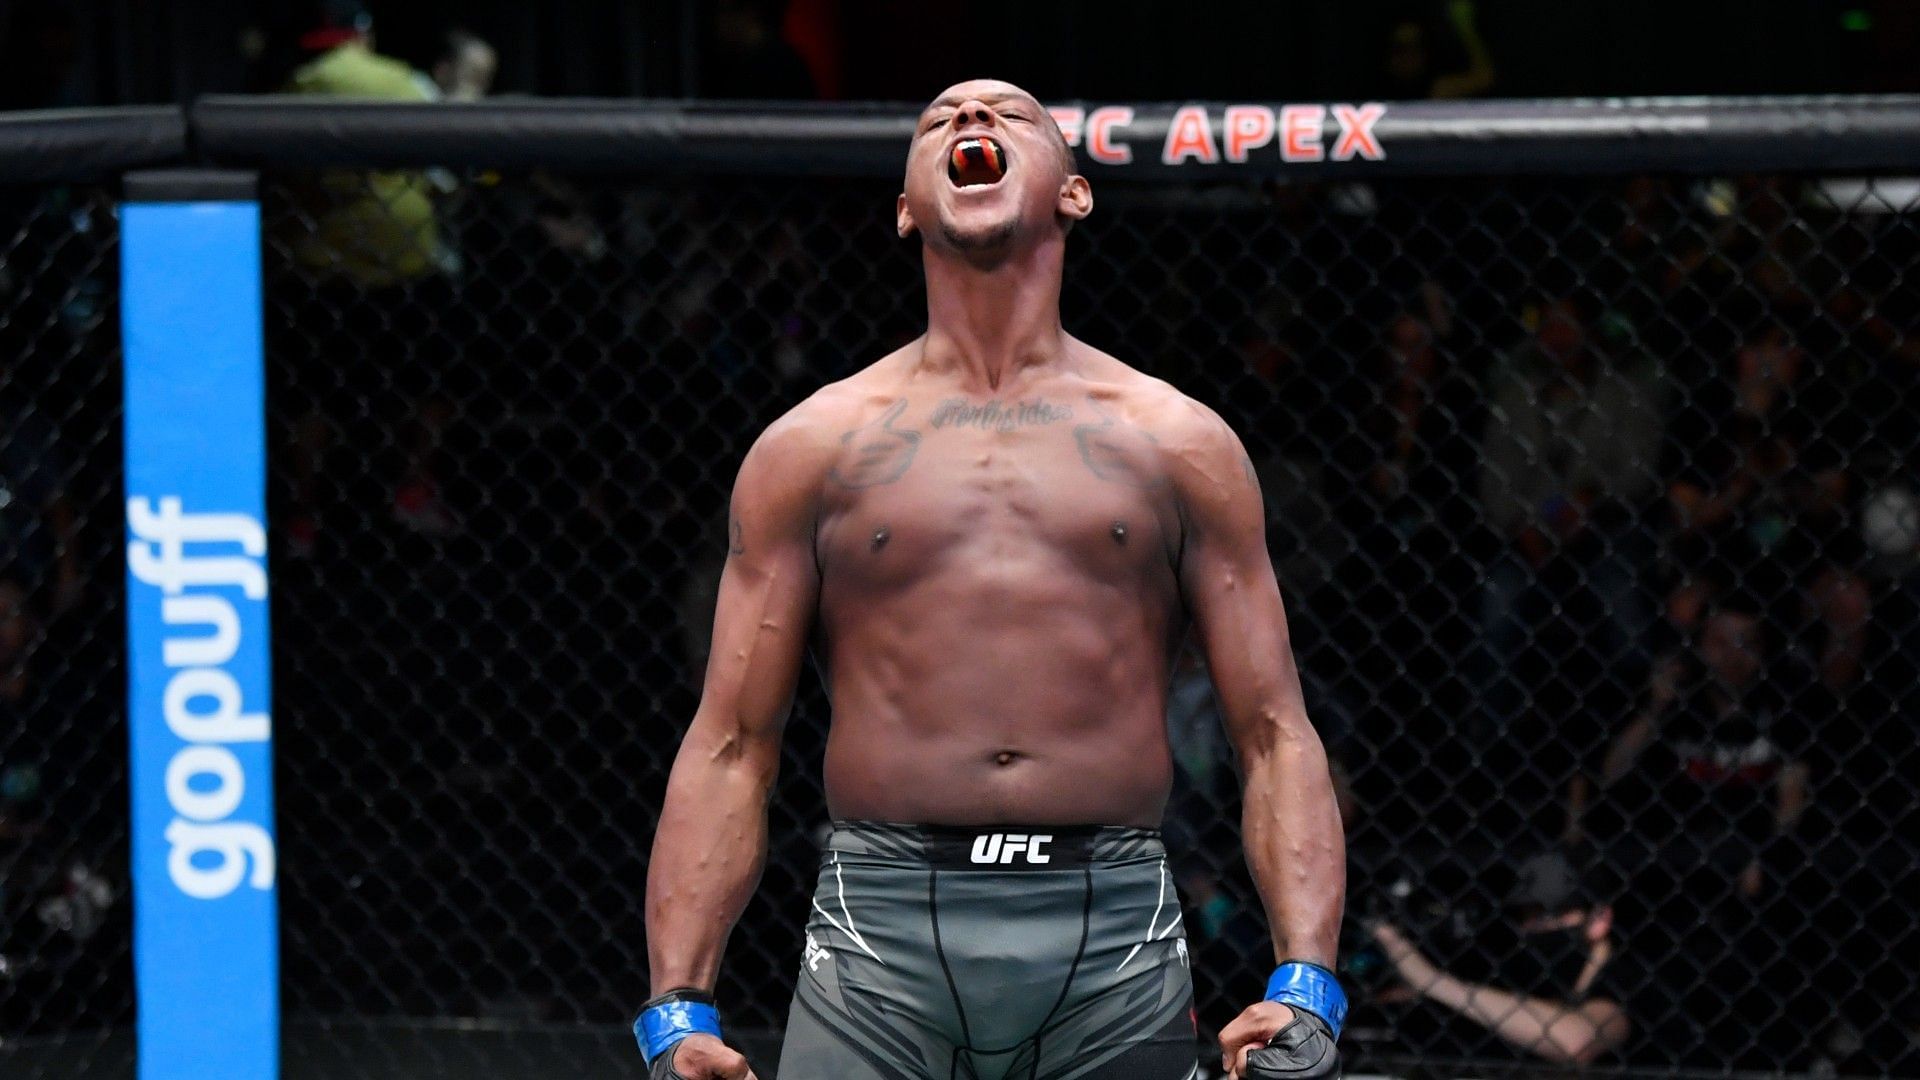 &lsquo;Sweet Dreams&rsquo; is a highly marketable fighter, meaning he&rsquo;ll likely receive quite a push from the UFC/